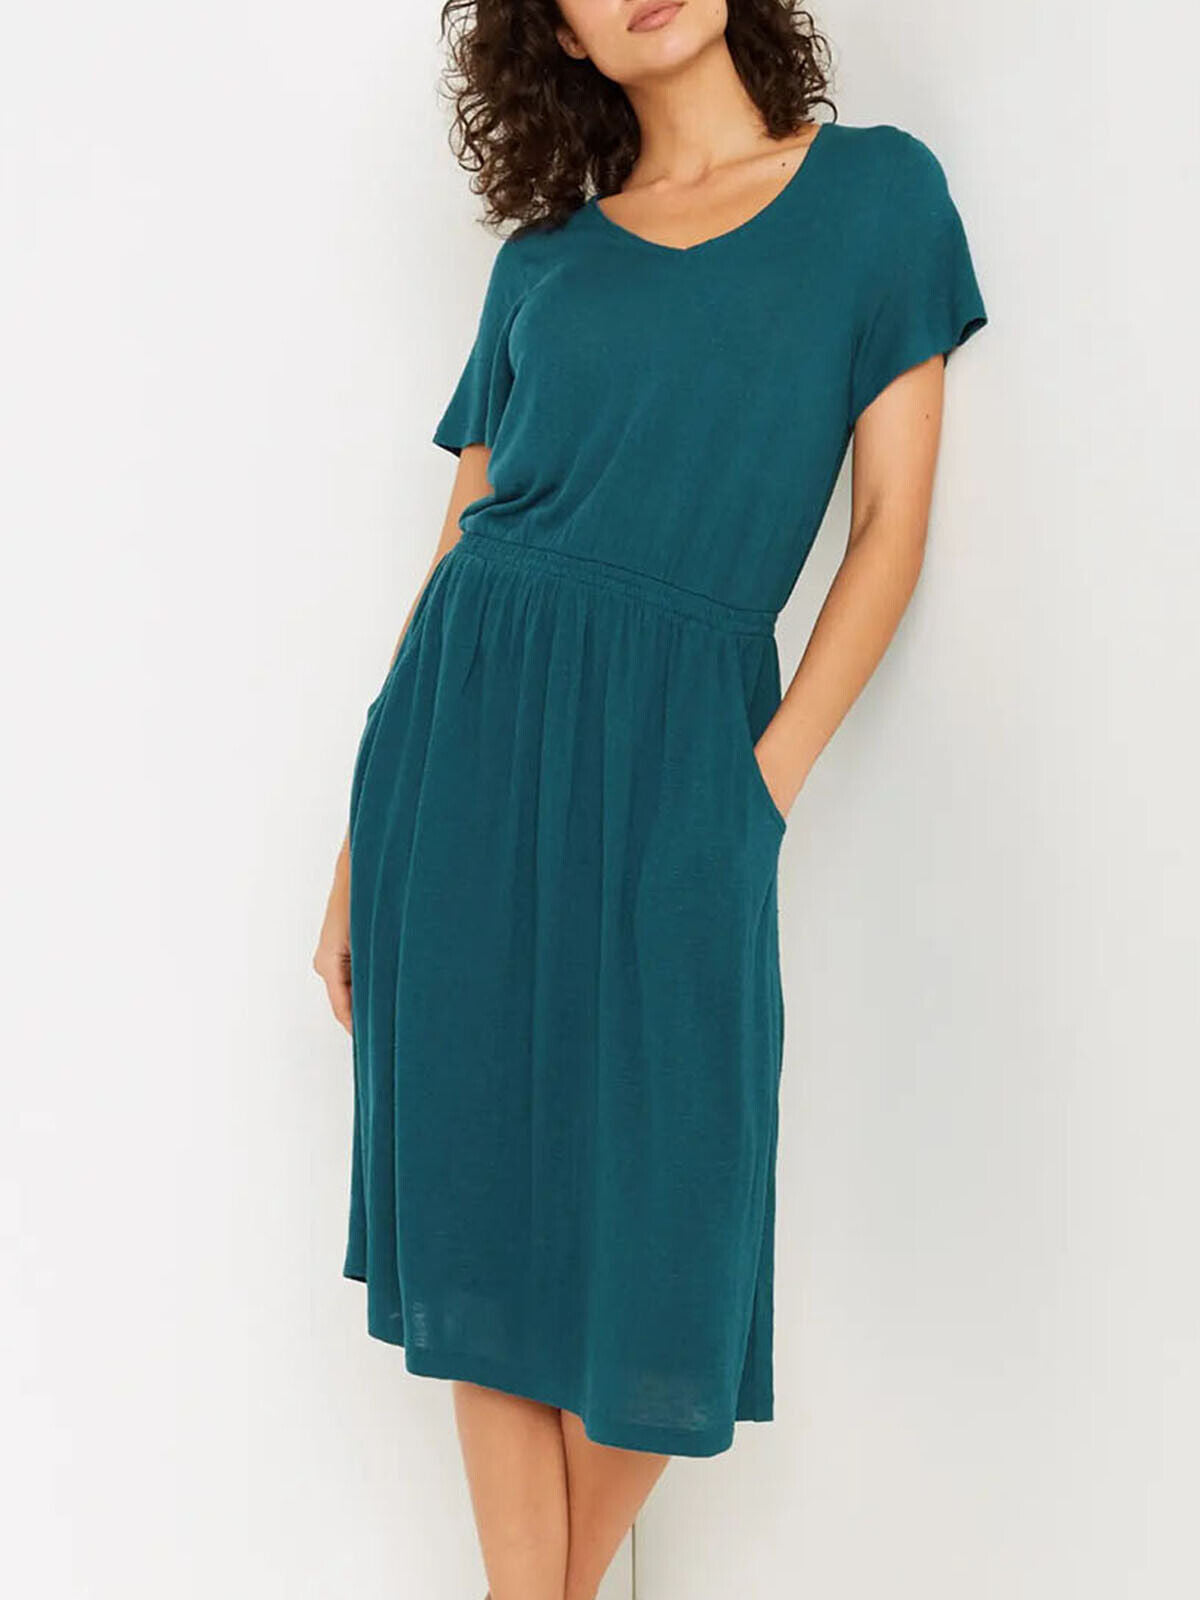 EX WHITE STUFF Teal Canyon Jersey Dress in Sizes 6, 10, 12, 18, 20 RRP £55